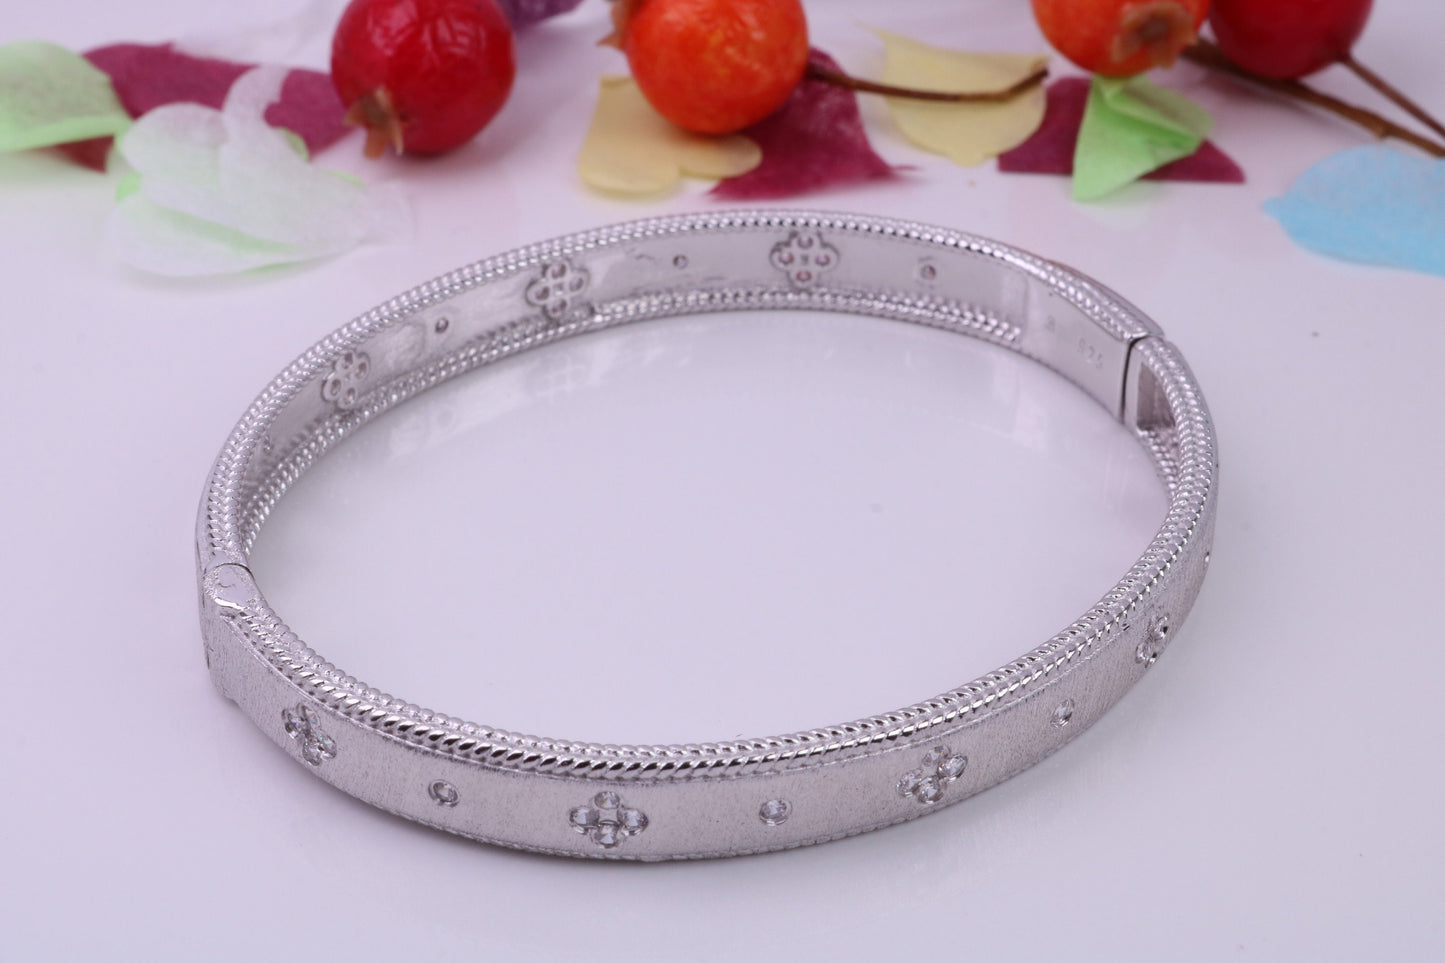 Hinged Bangle set with Diamond White Cubic Zirconia, Made from solid Sterling Silver, Rhodium Plated, Matt Finished